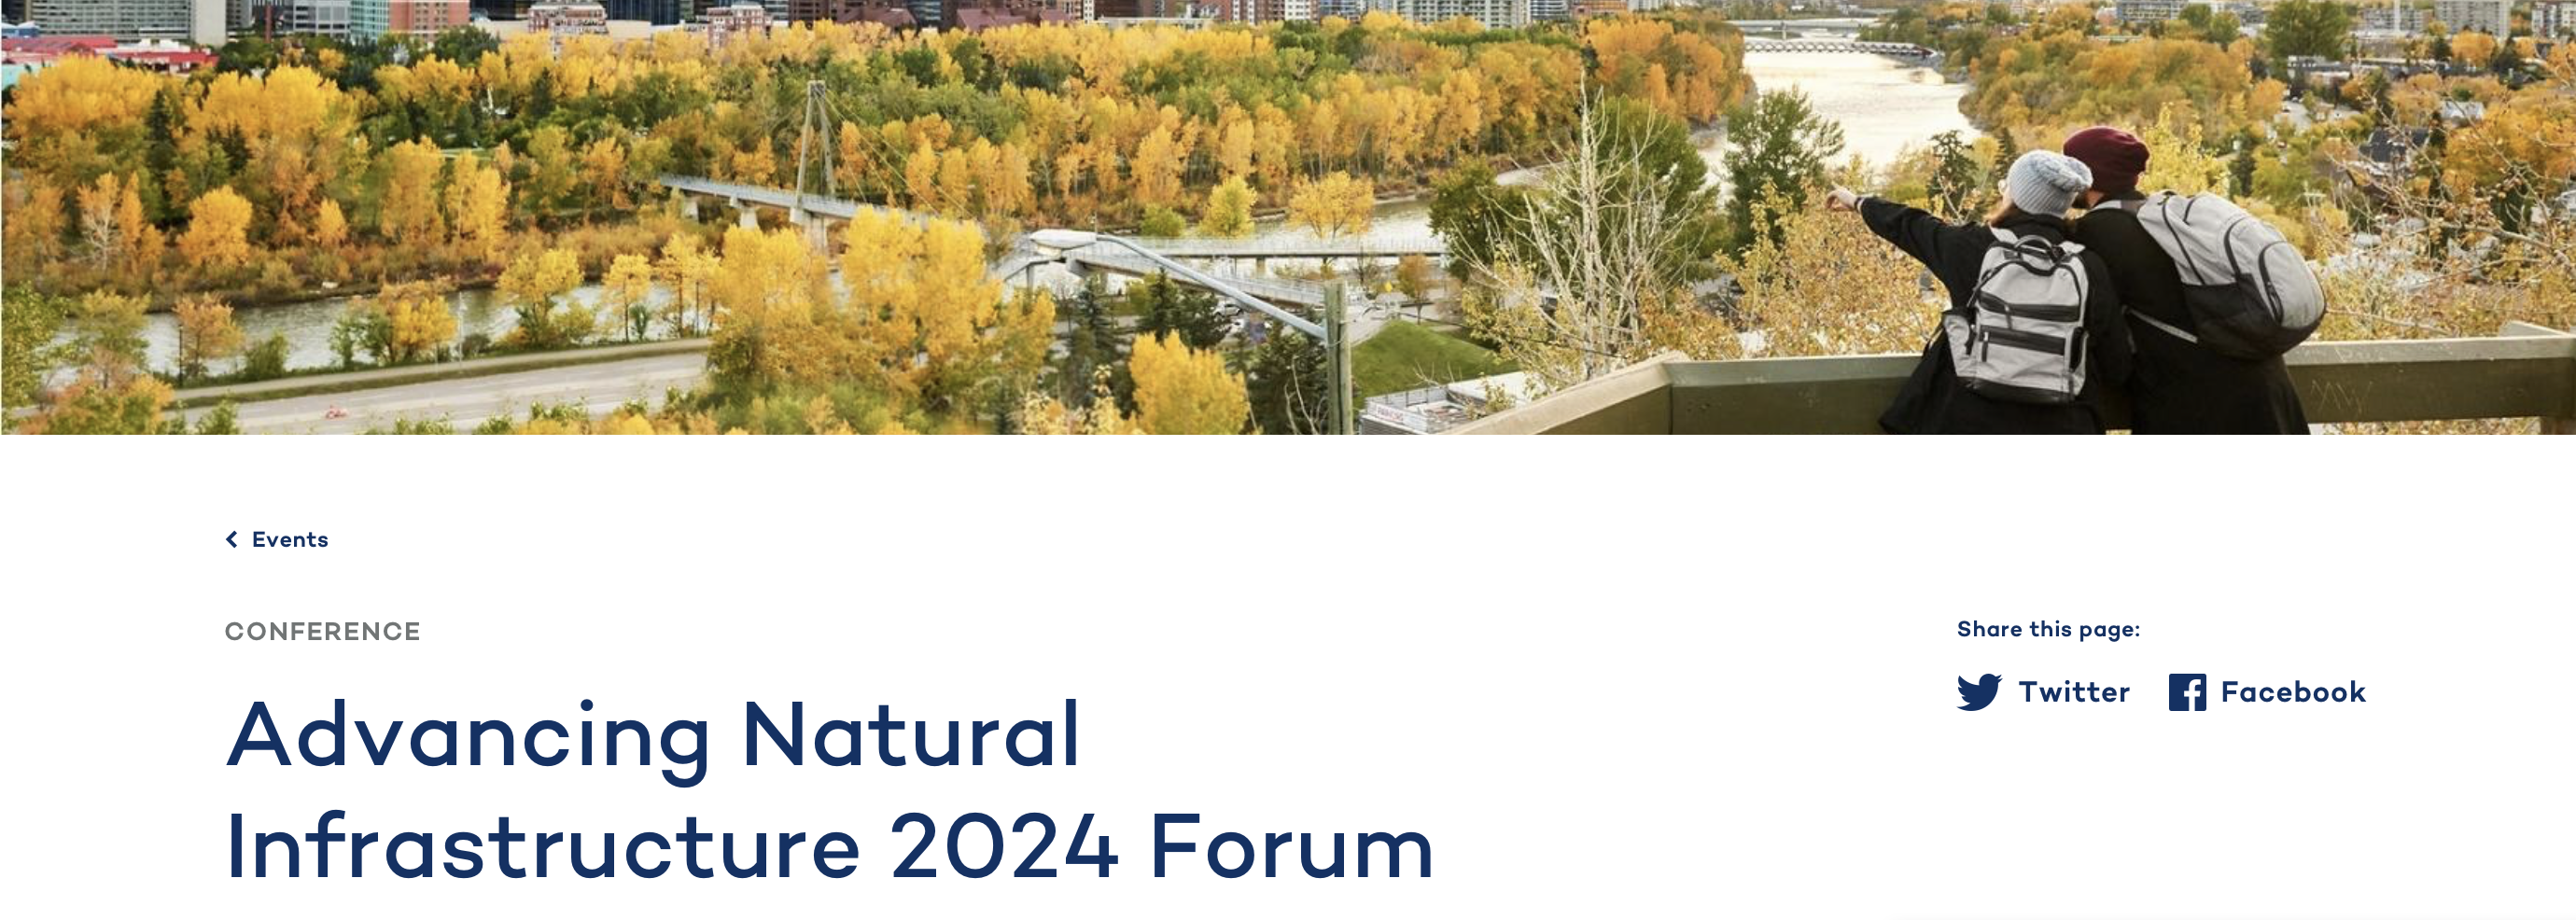 Advancing Natural Infrastructure Forum 2024